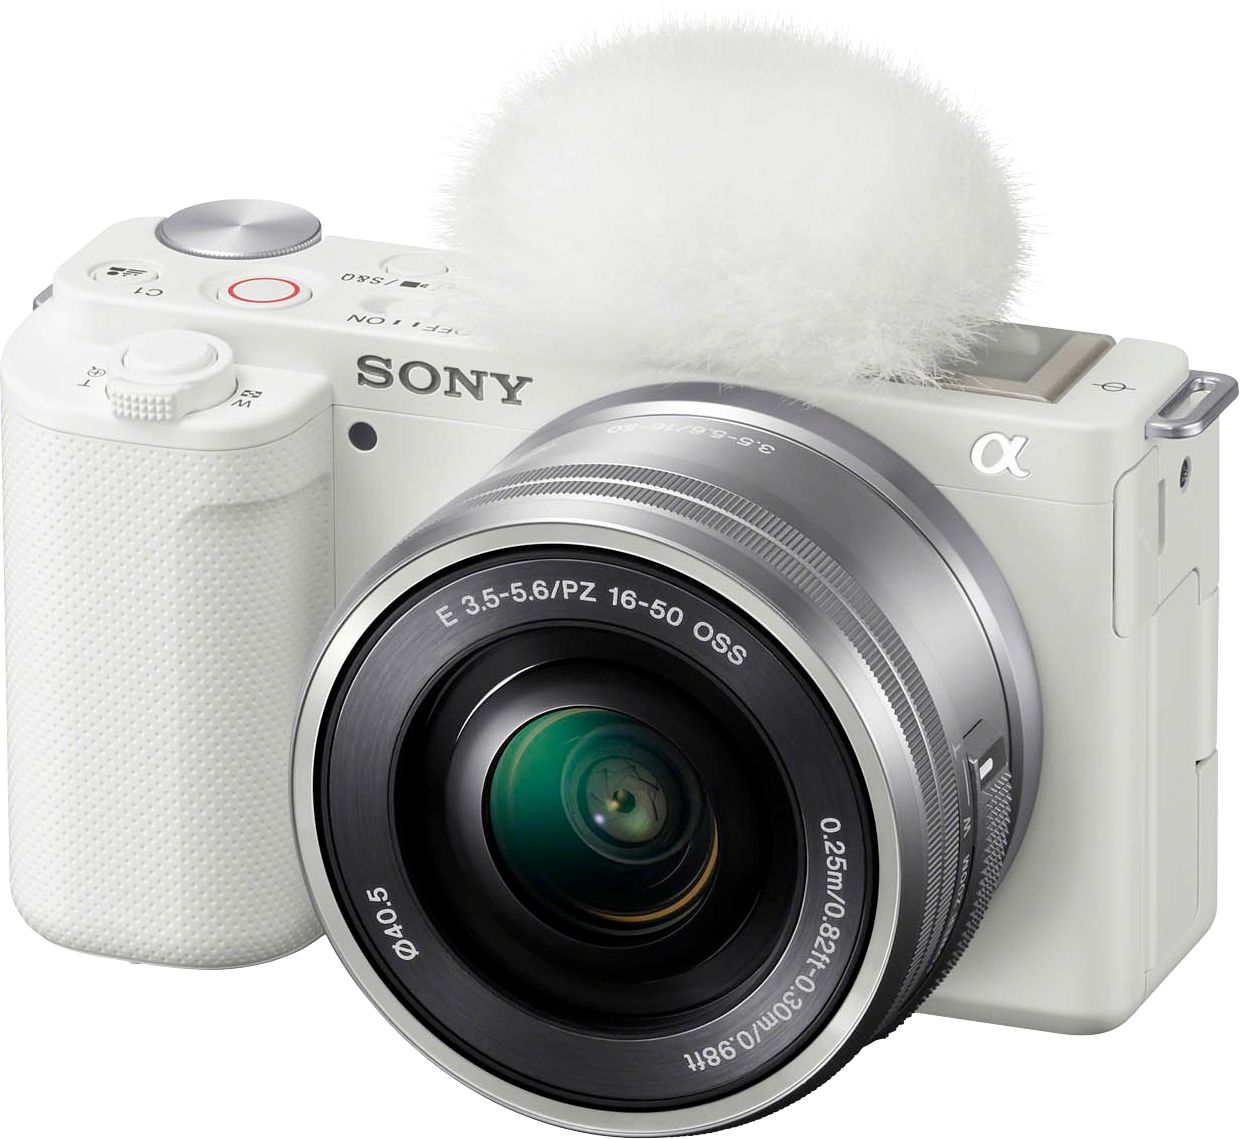 Angle View: Sony a7 IV ILCE-7M4 - Digital camera - mirrorless - 33.0 MP - Full Frame - 4K / 60 fps - body only - Wi-Fi, Bluetooth